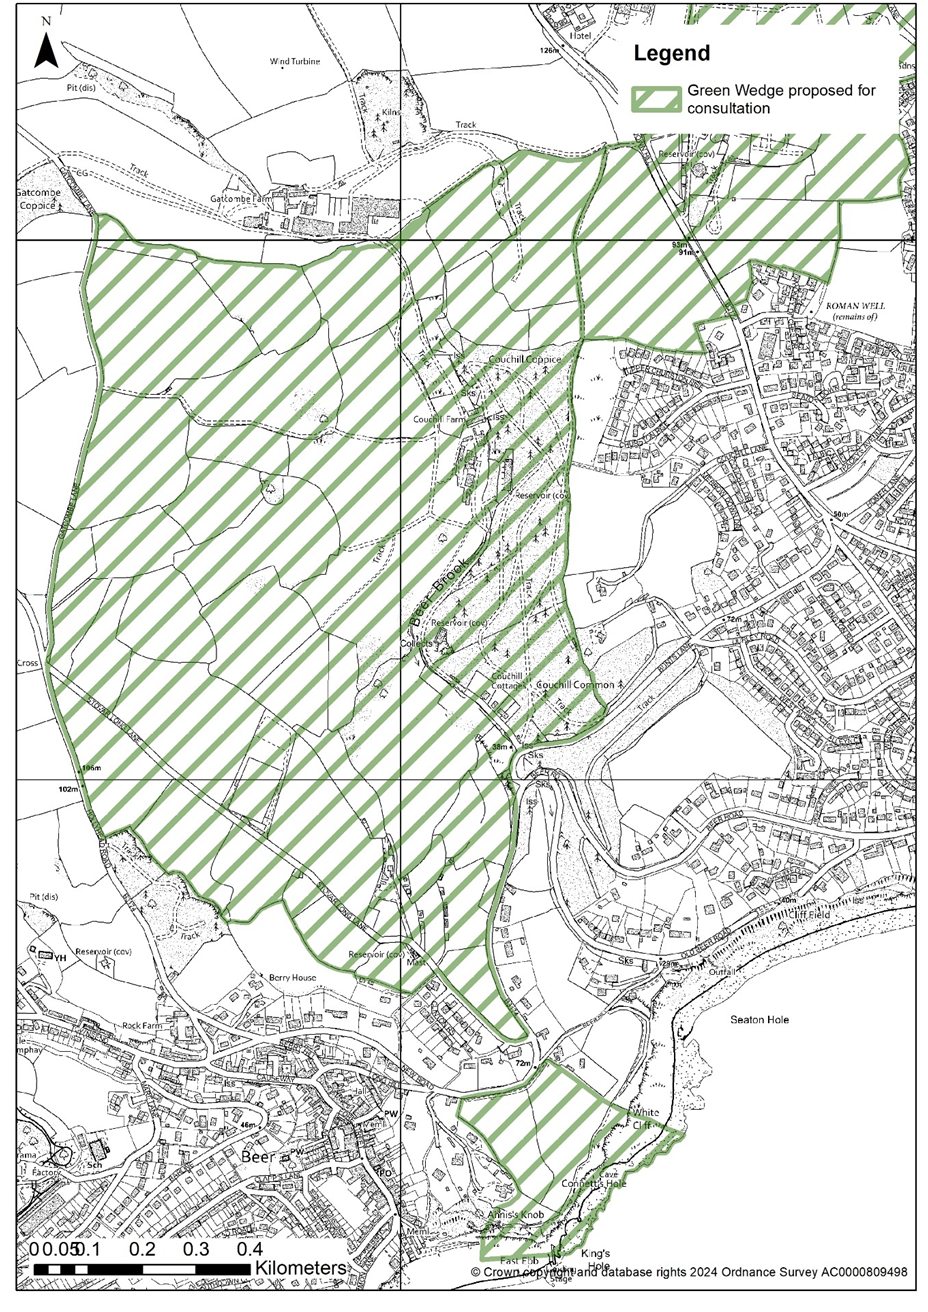 Map of the proposed Green Wedge between Beer and Seaton